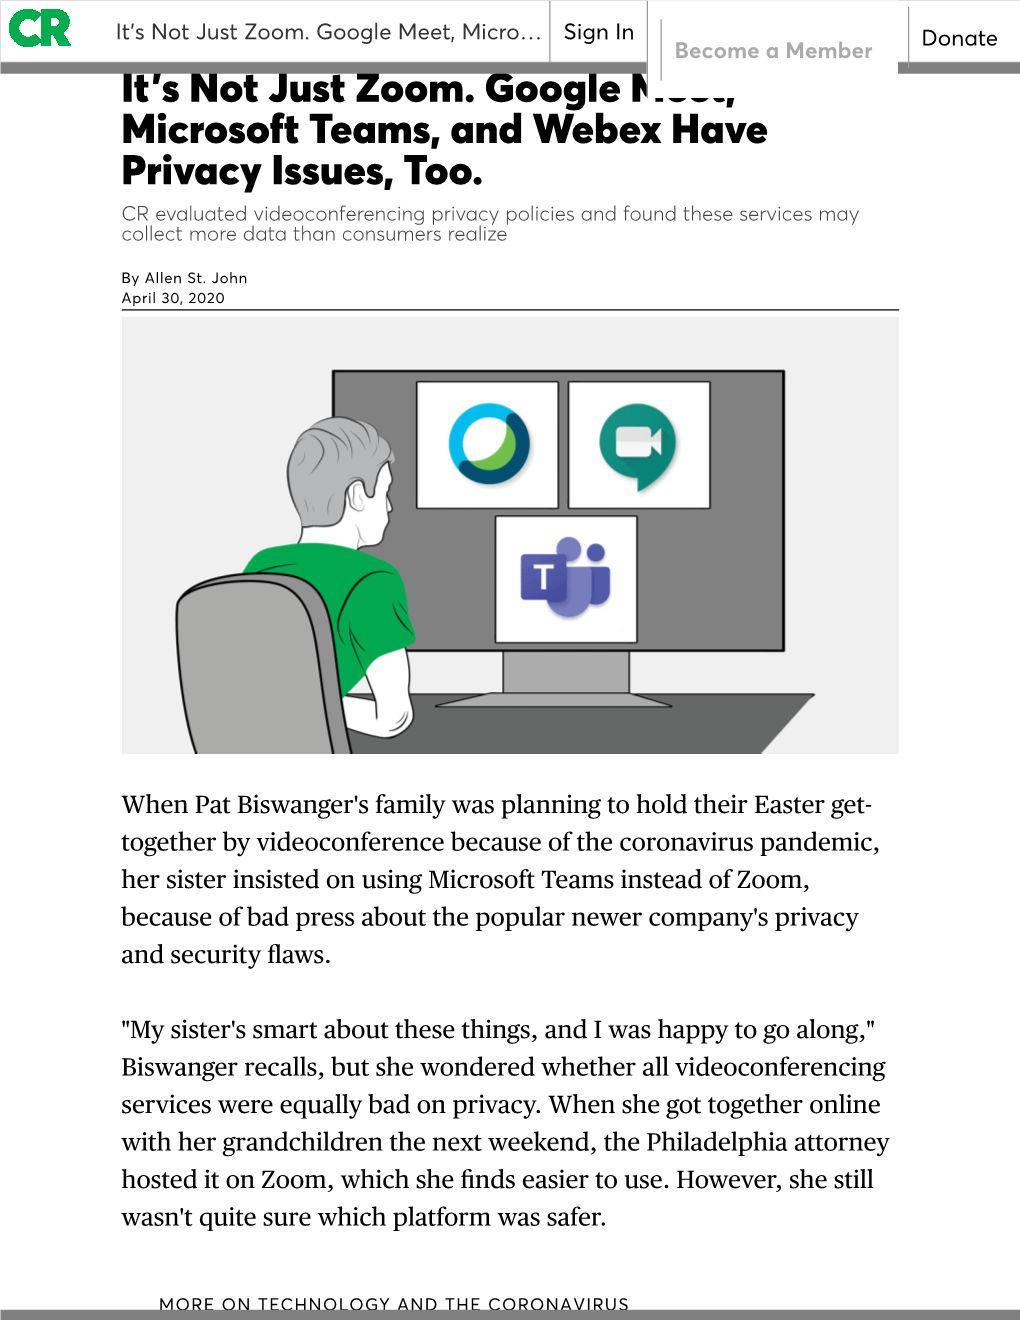 It's Not Just Zoom. Google Meet, Microsoft Teams, and Webex Have Privacy Issues, Too